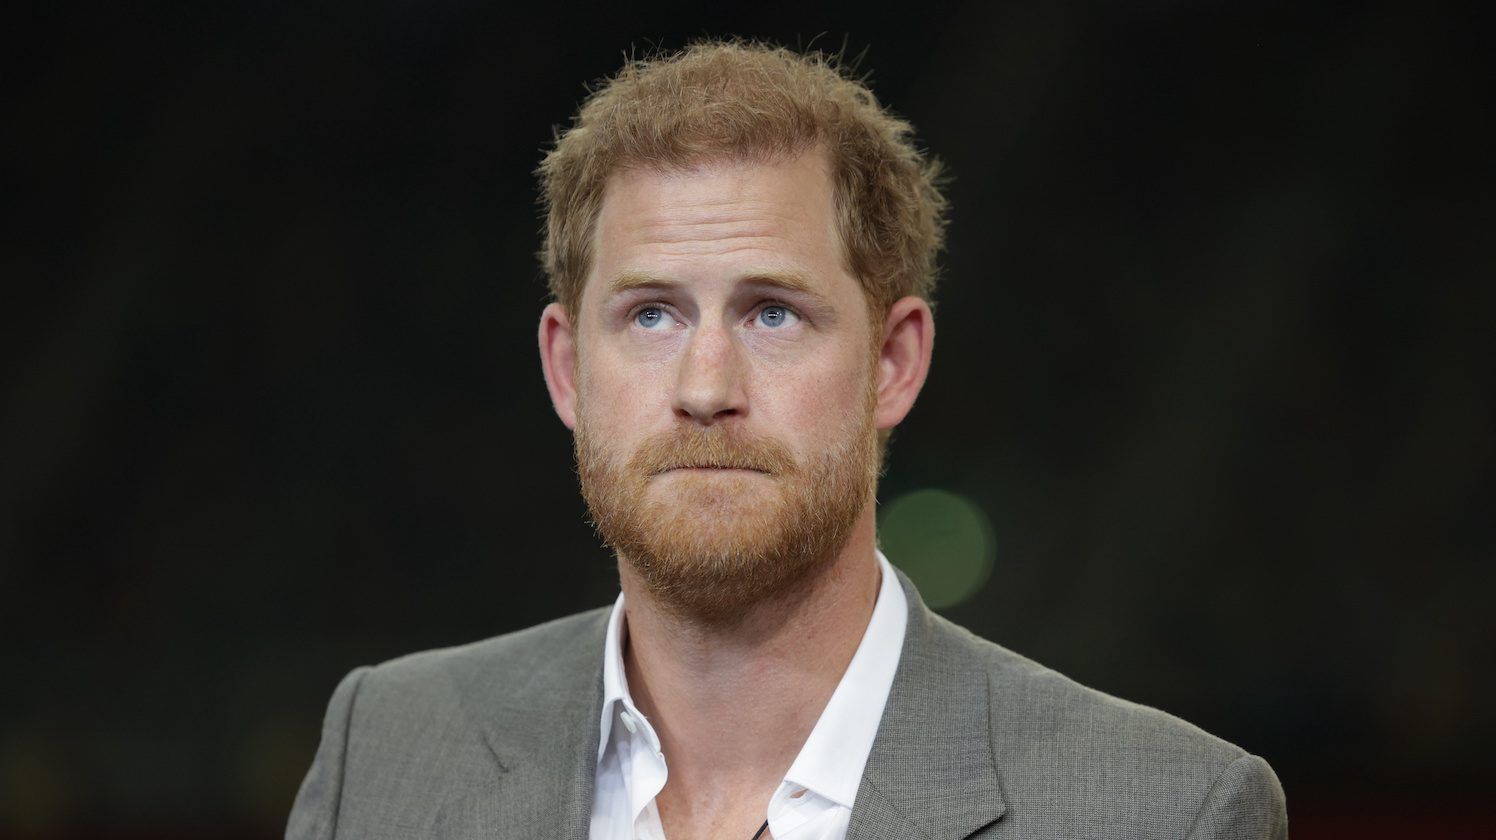 prince harry is hardly the only person to experience penis frostbite. (photo by chris jackson/getty images)